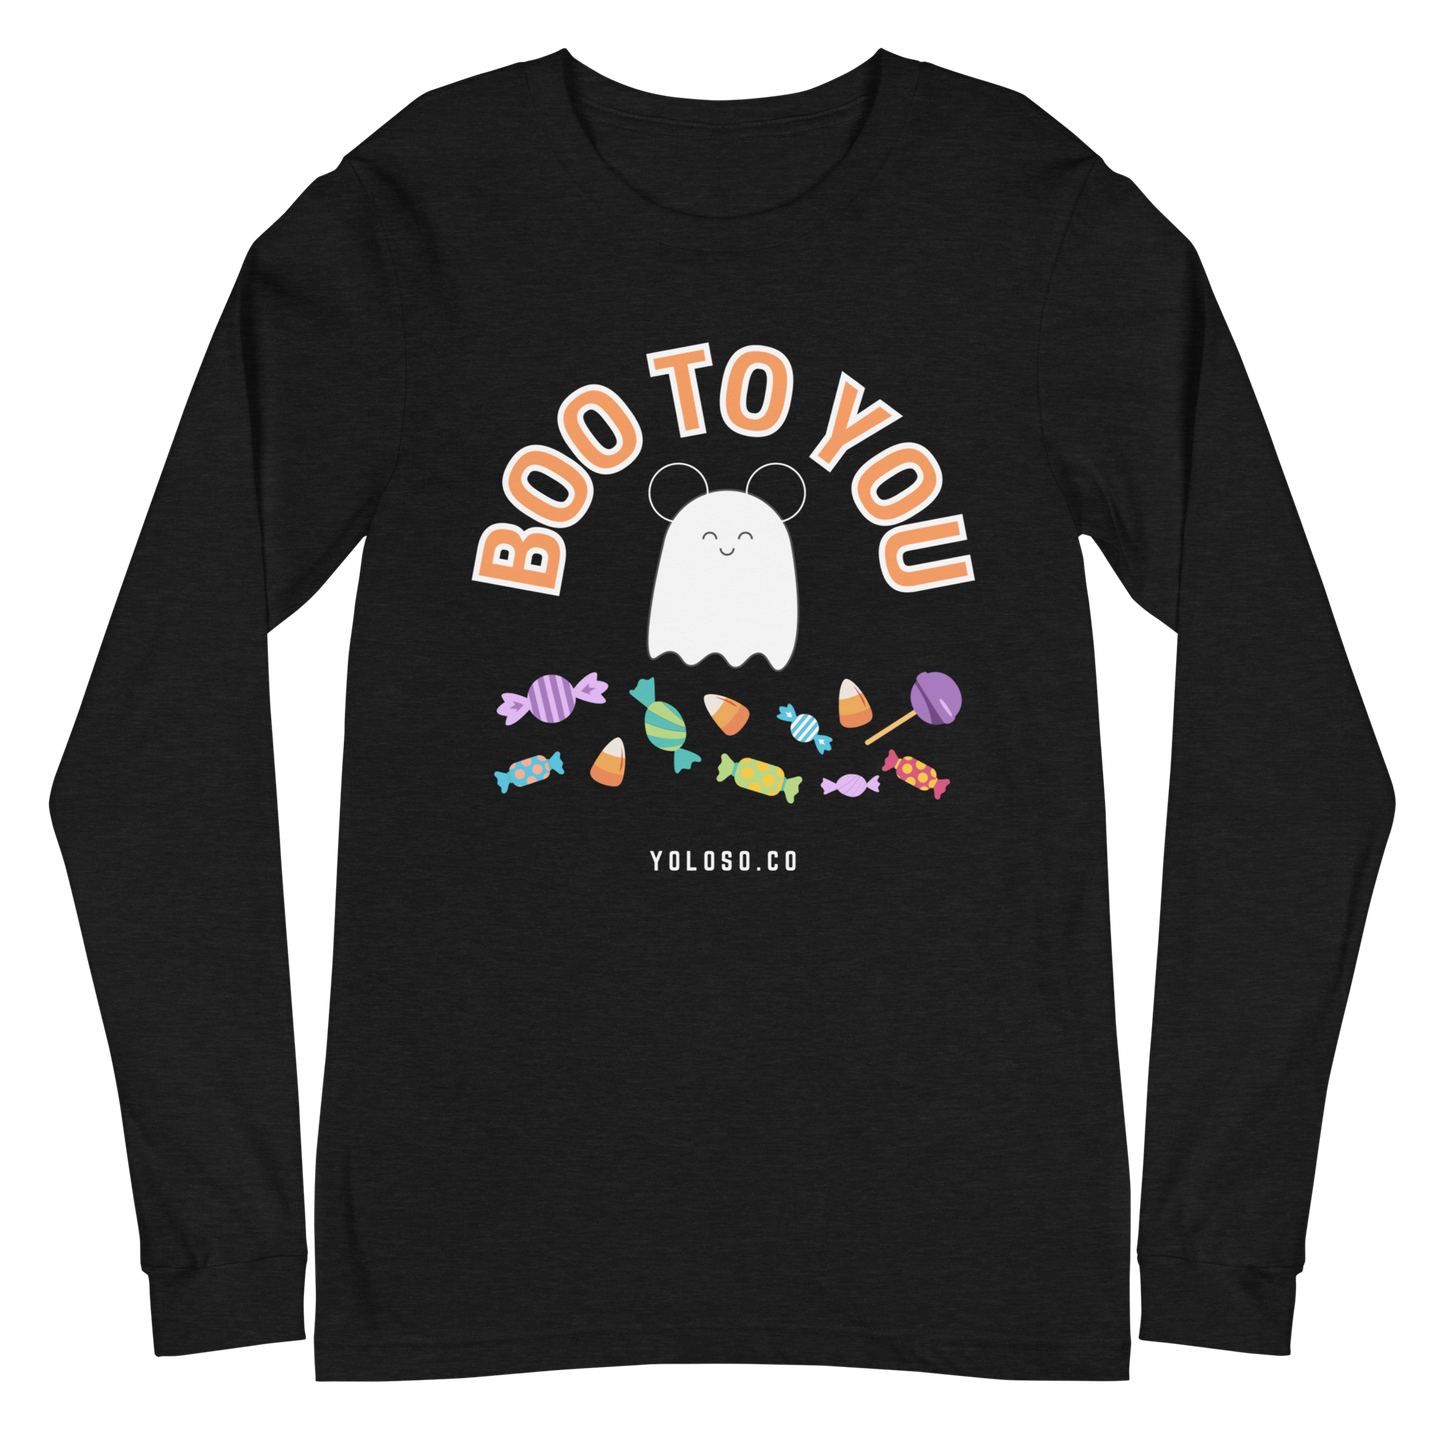 Boo to You long sleeve